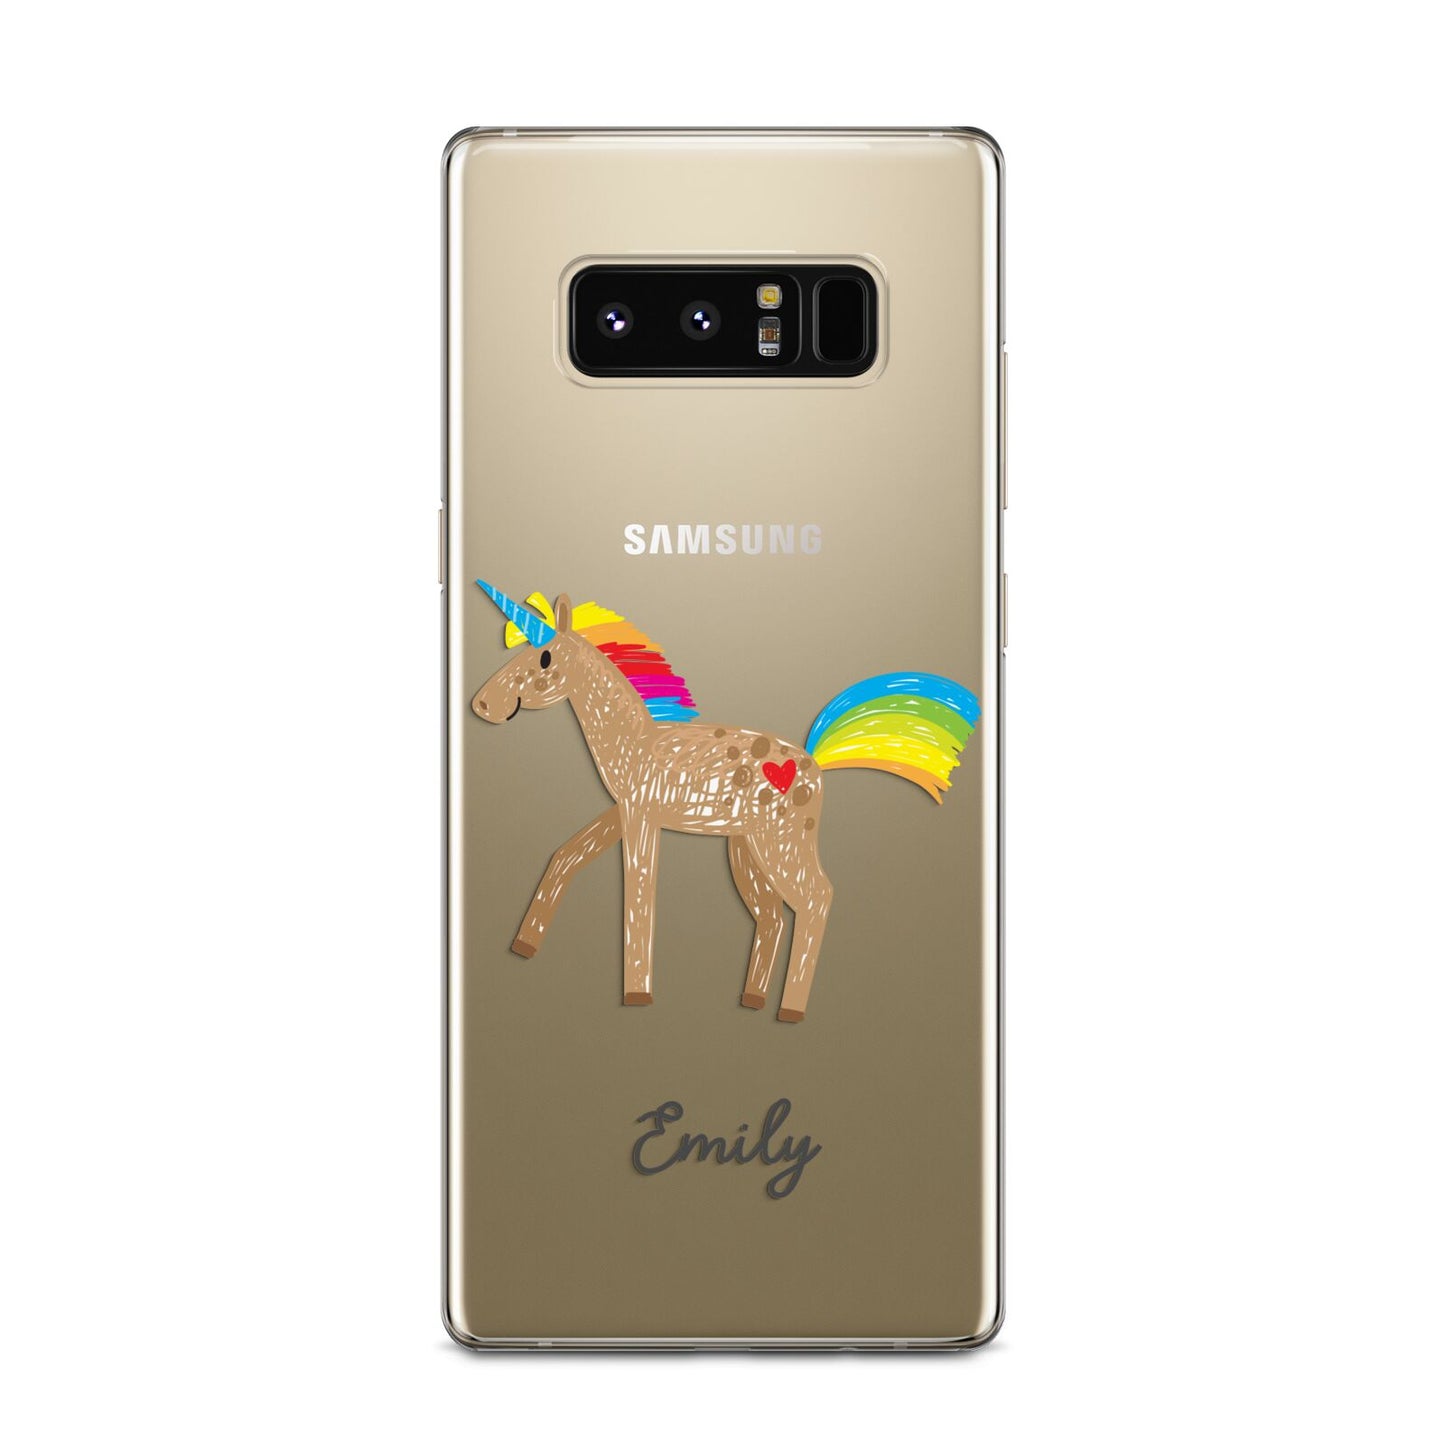 Personalised Unicorn with Name Samsung Galaxy Note 8 Case